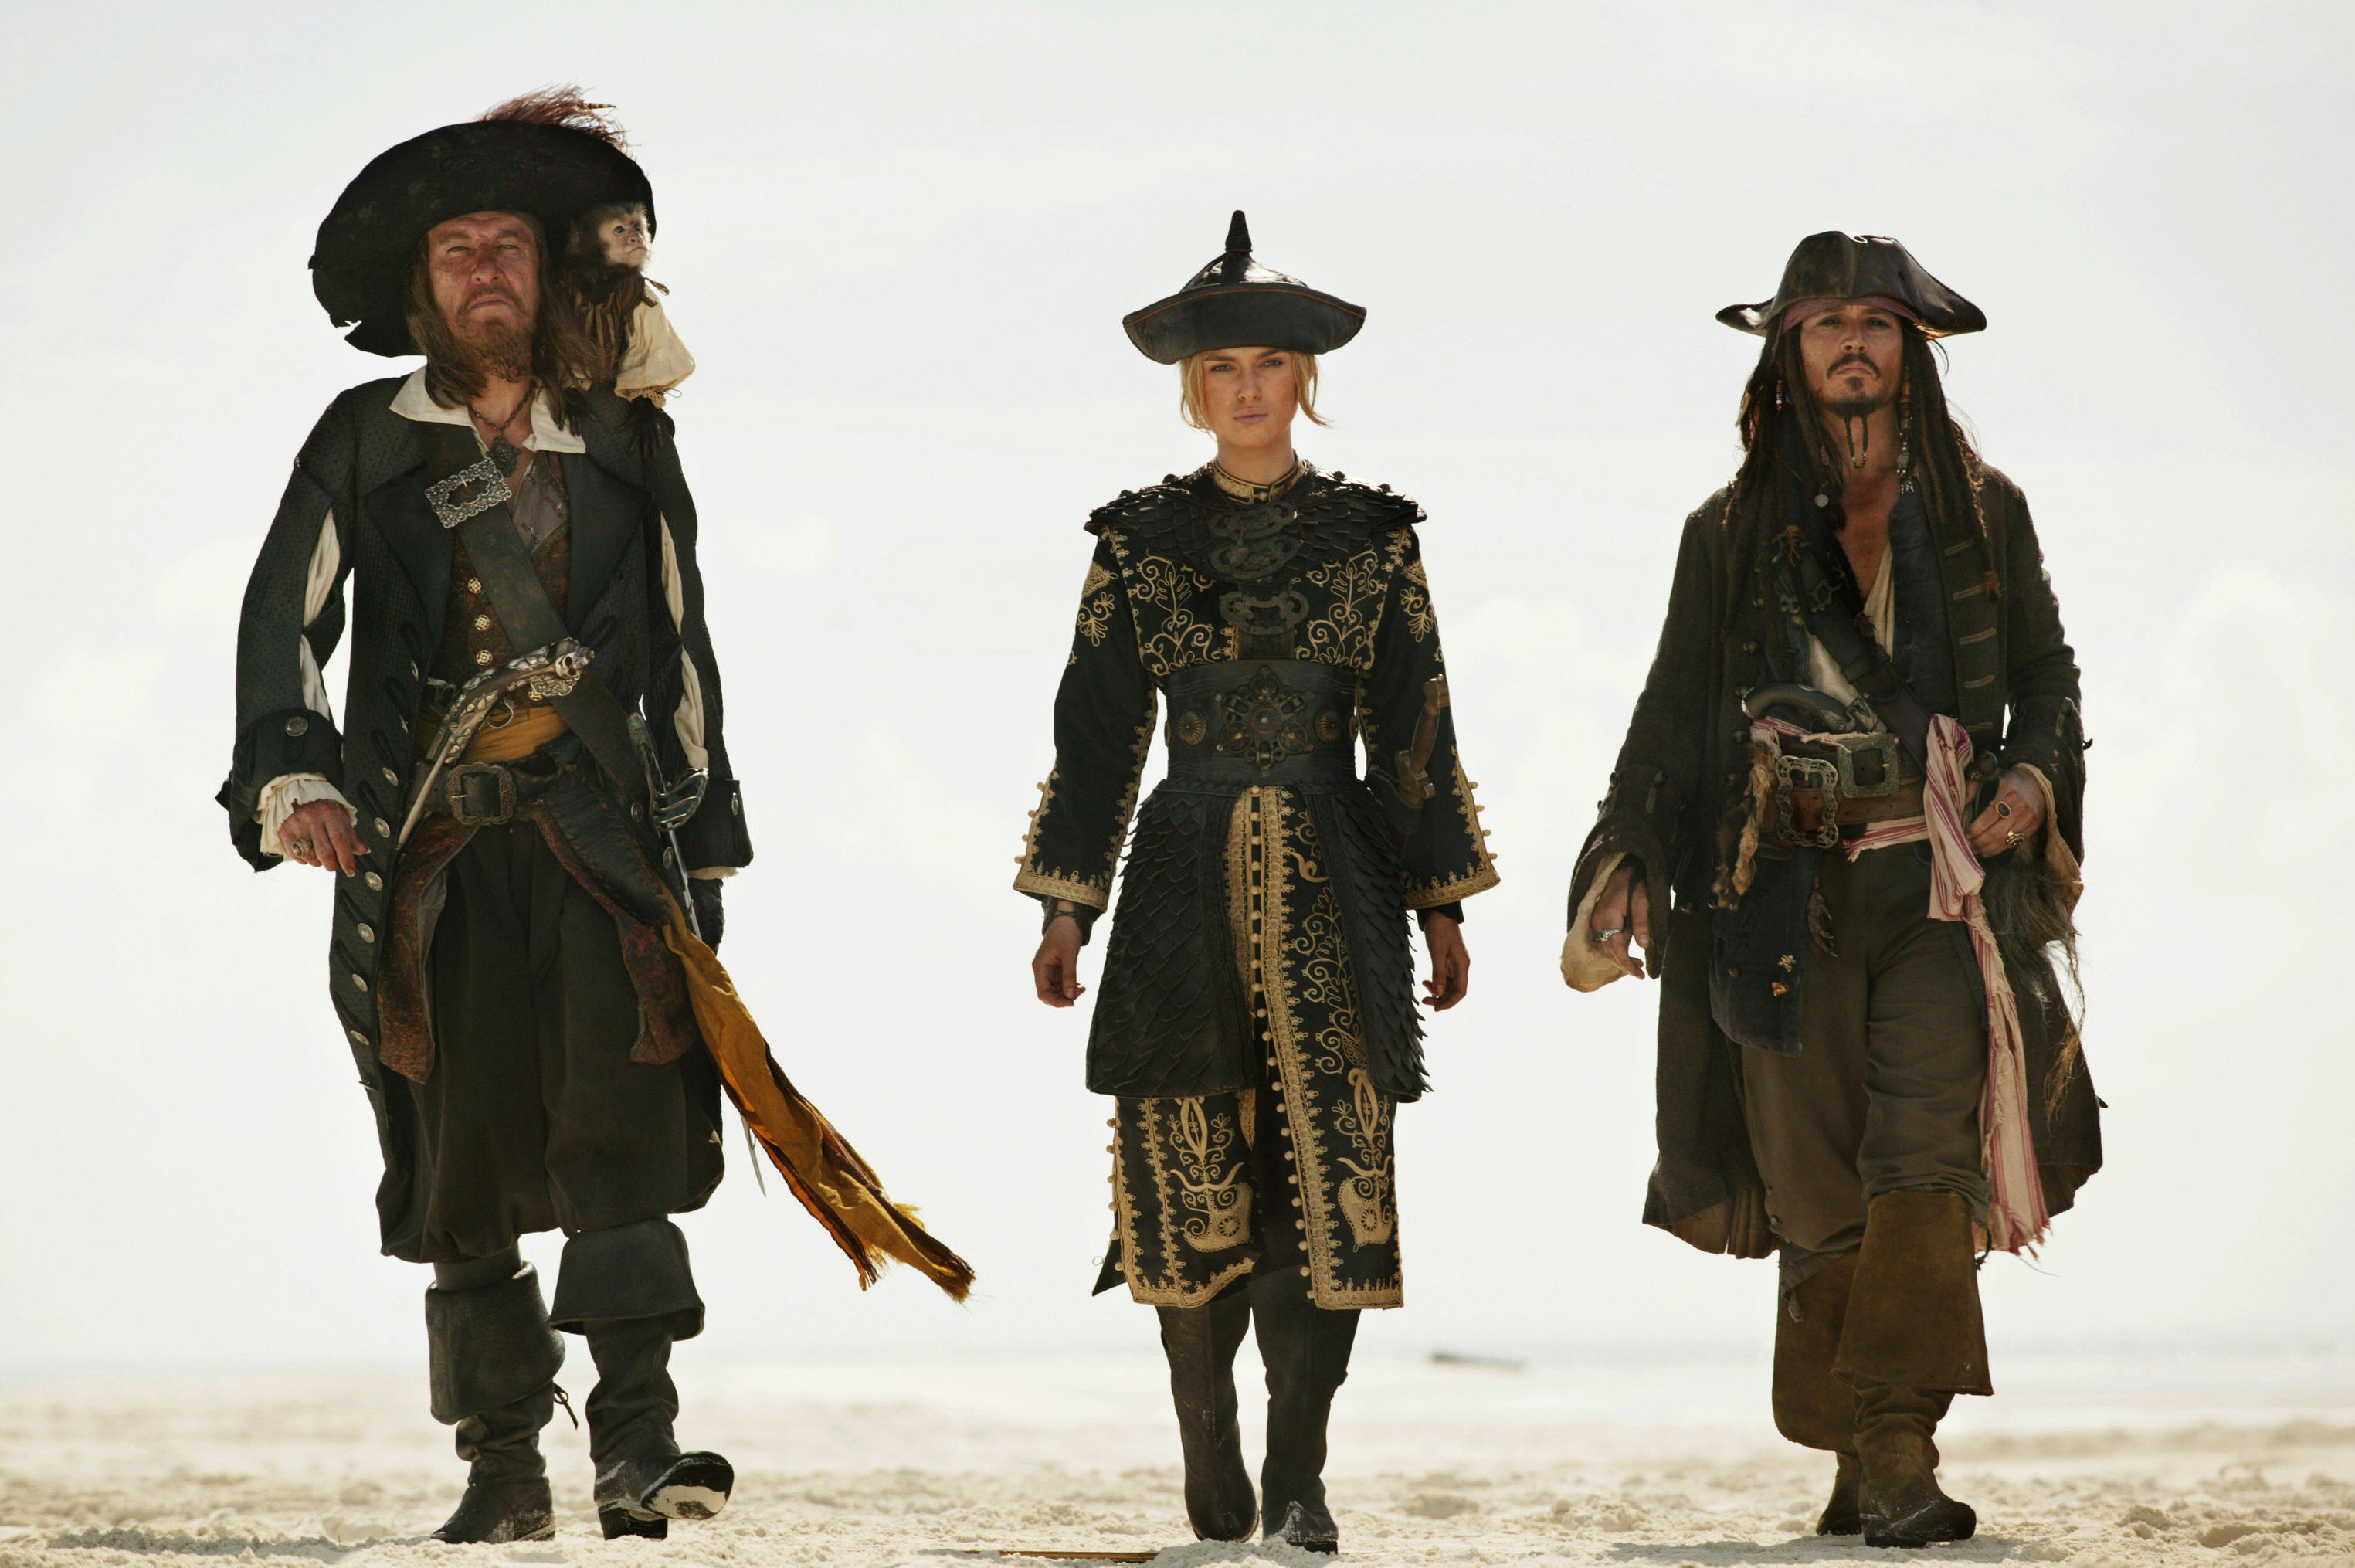 movie, pirates of the caribbean: at world's end, elizabeth swann, geoffrey rush, hector barbossa, jack sparrow, johnny depp, keira knightley, pirates of the caribbean Aesthetic wallpaper